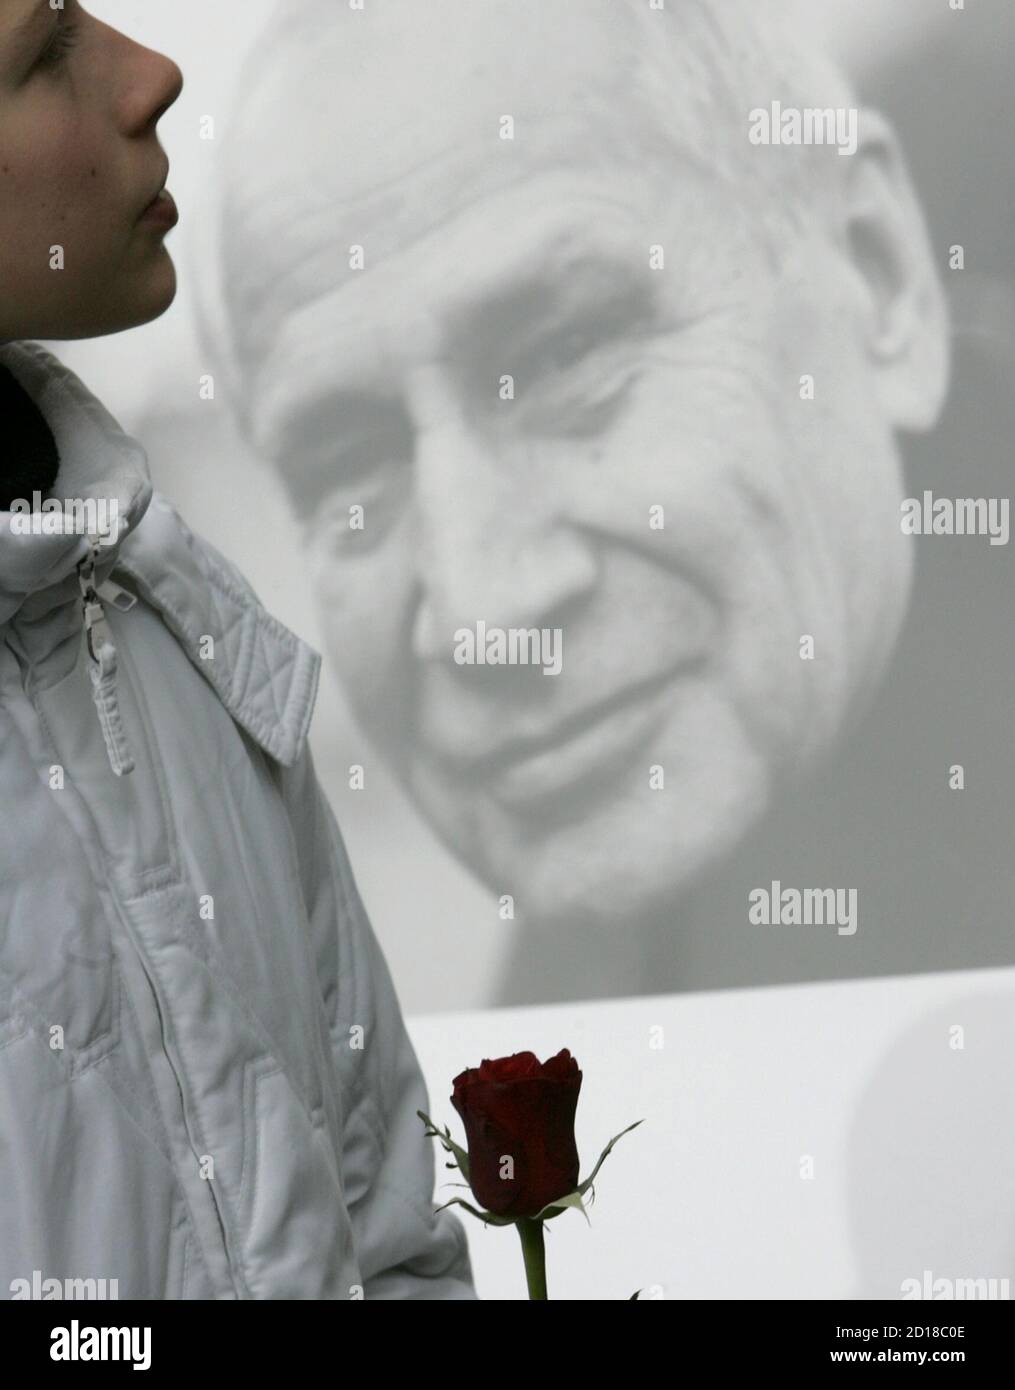 A women passes a photograph showing former spymaster Markus Wolf during a funeral service in Berlin November 25, 2006.  Wolf, who ran East Germany's foreign intelligence network for over 30 years, died on November 9, 2006 aged 83 in the German capital.      REUTERS/Tobias Schwarz     (GERMANY) Stock Photo